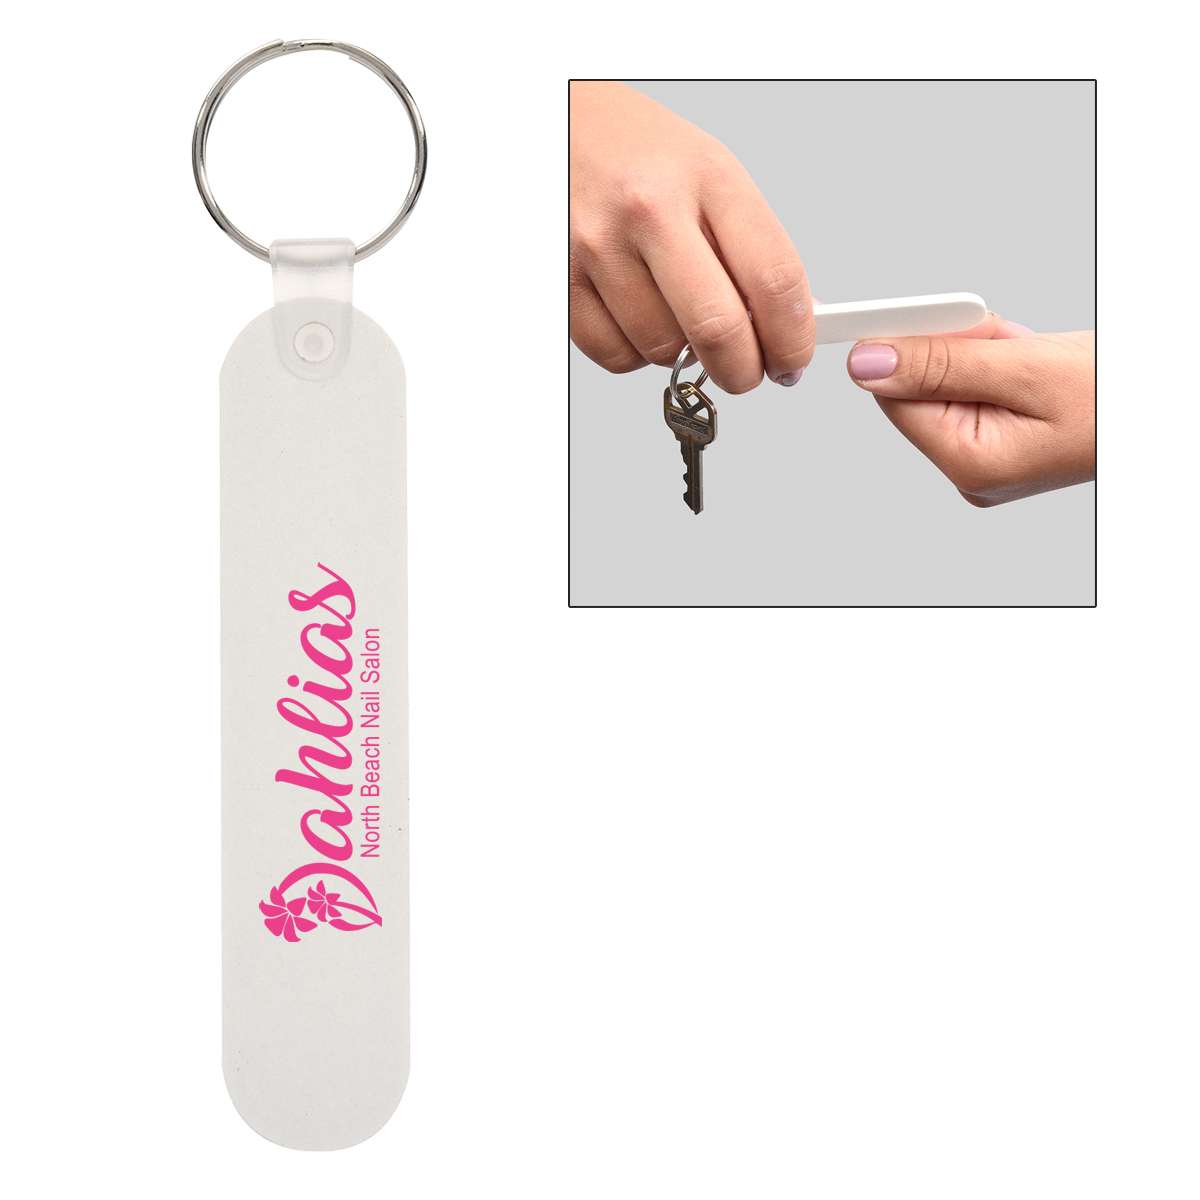 Breast Cancer Awareness 2020 Promotional Products